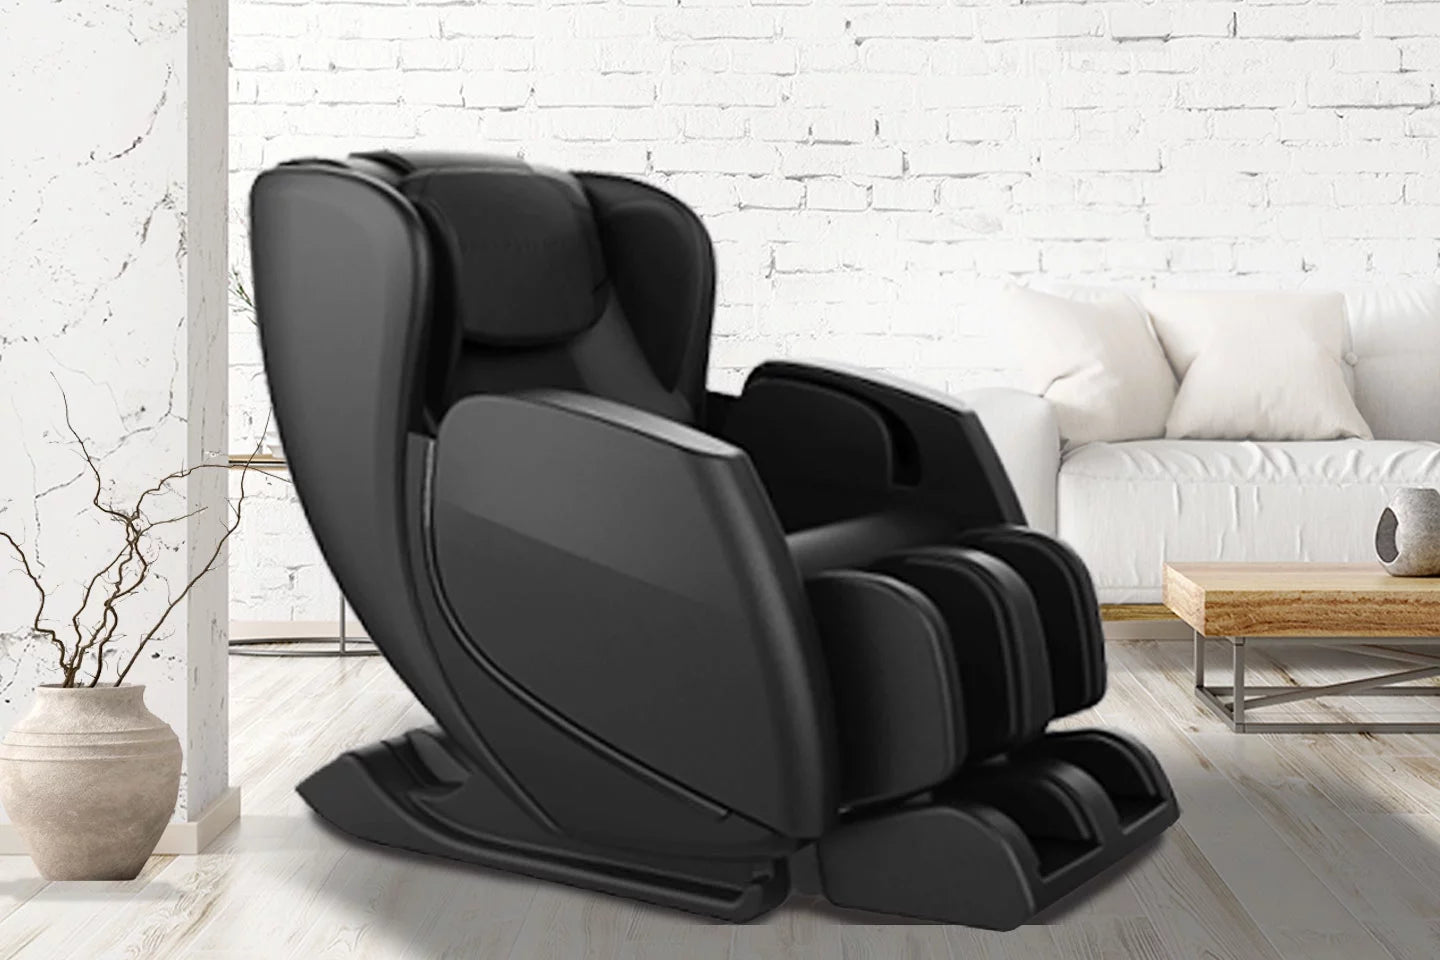 Revive Your Senses with the Black Revival Massage Chair